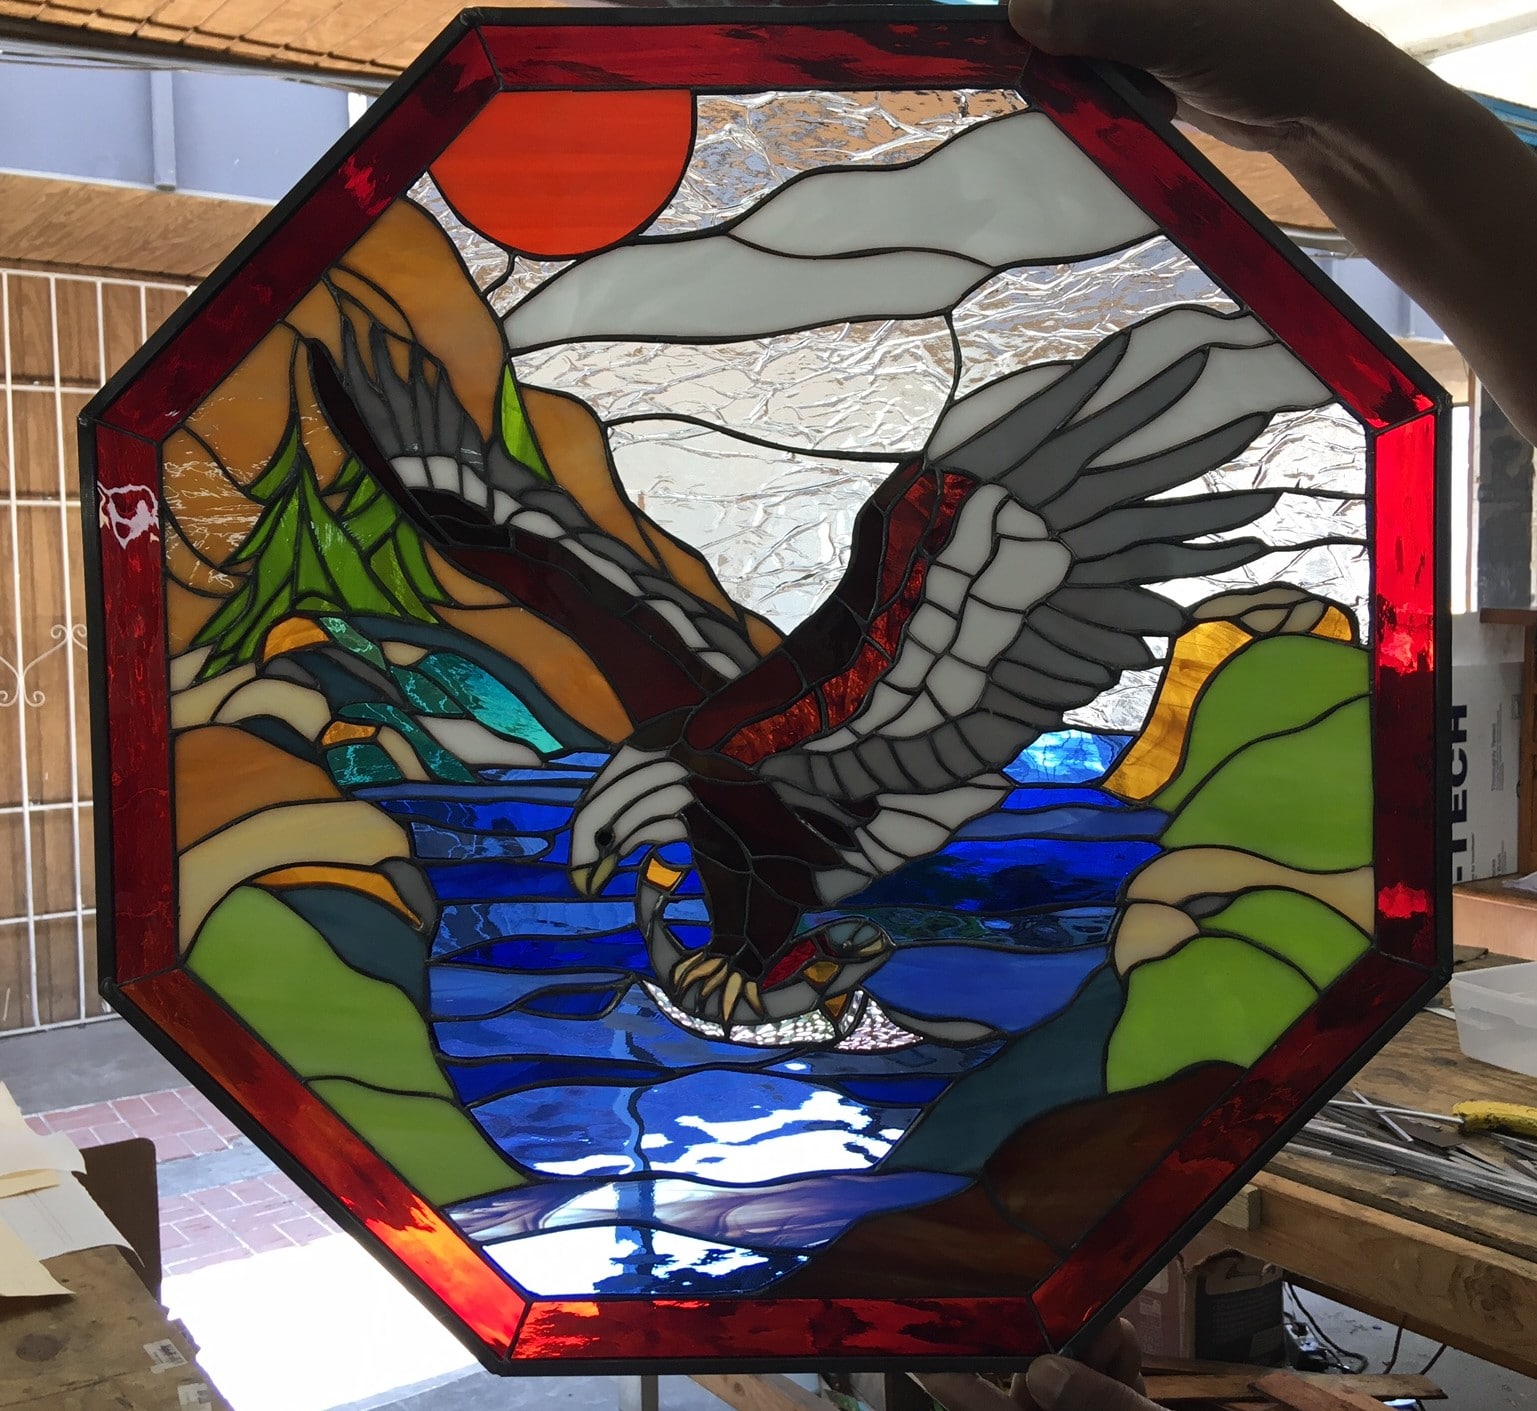 So nice alaskan eagle lake and pine trees stained glass